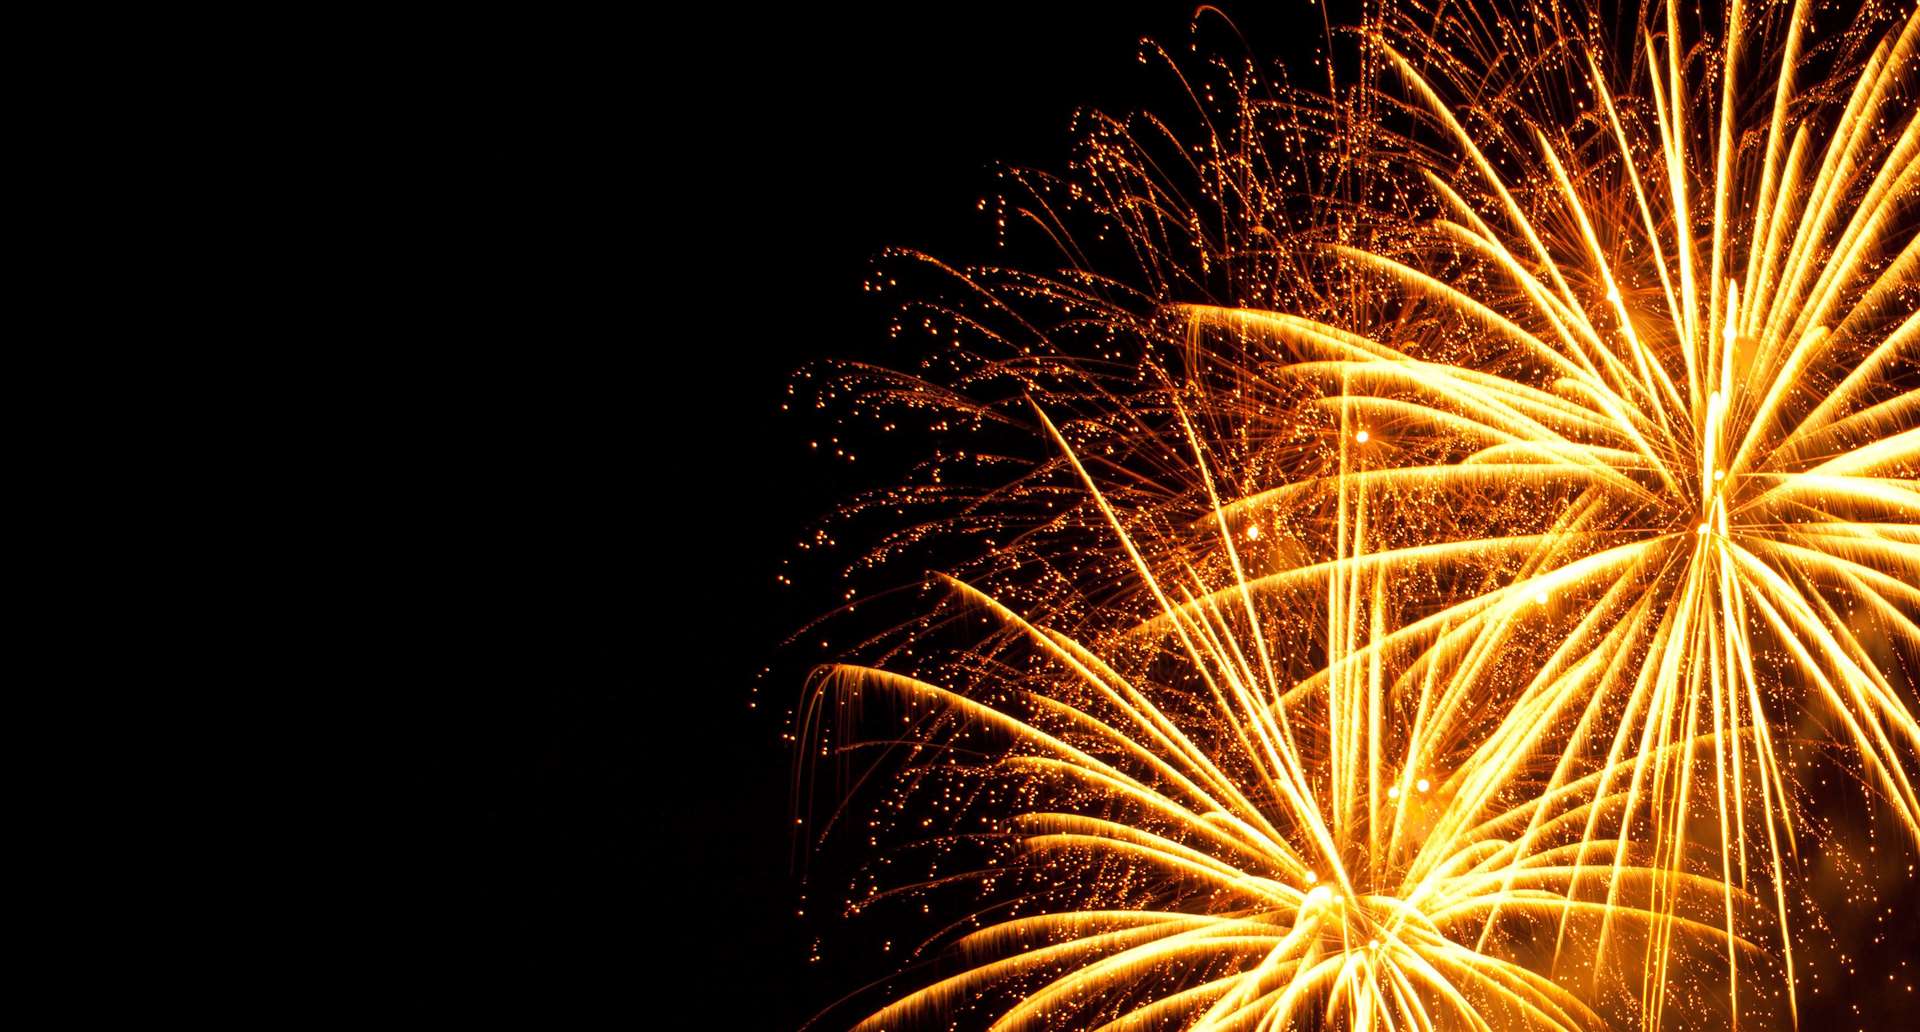 Fireworks can be used in the UK any time from 7am to 11pm.